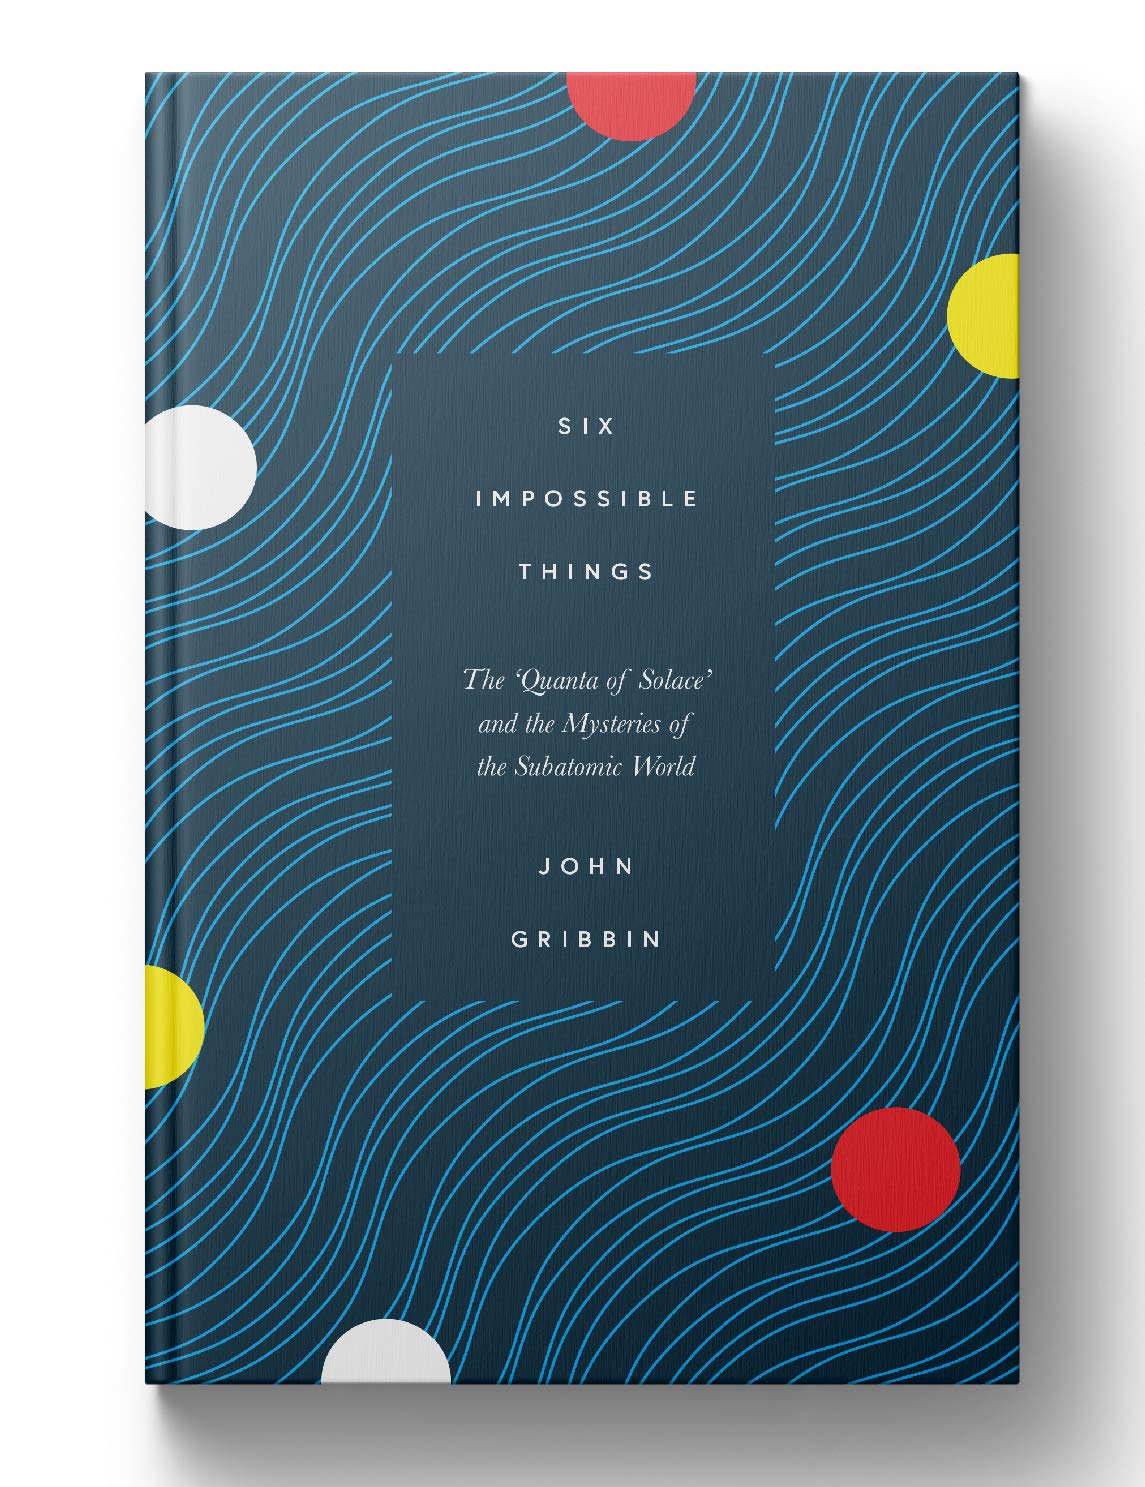 Six Impossible Things (2019, MIT Press)